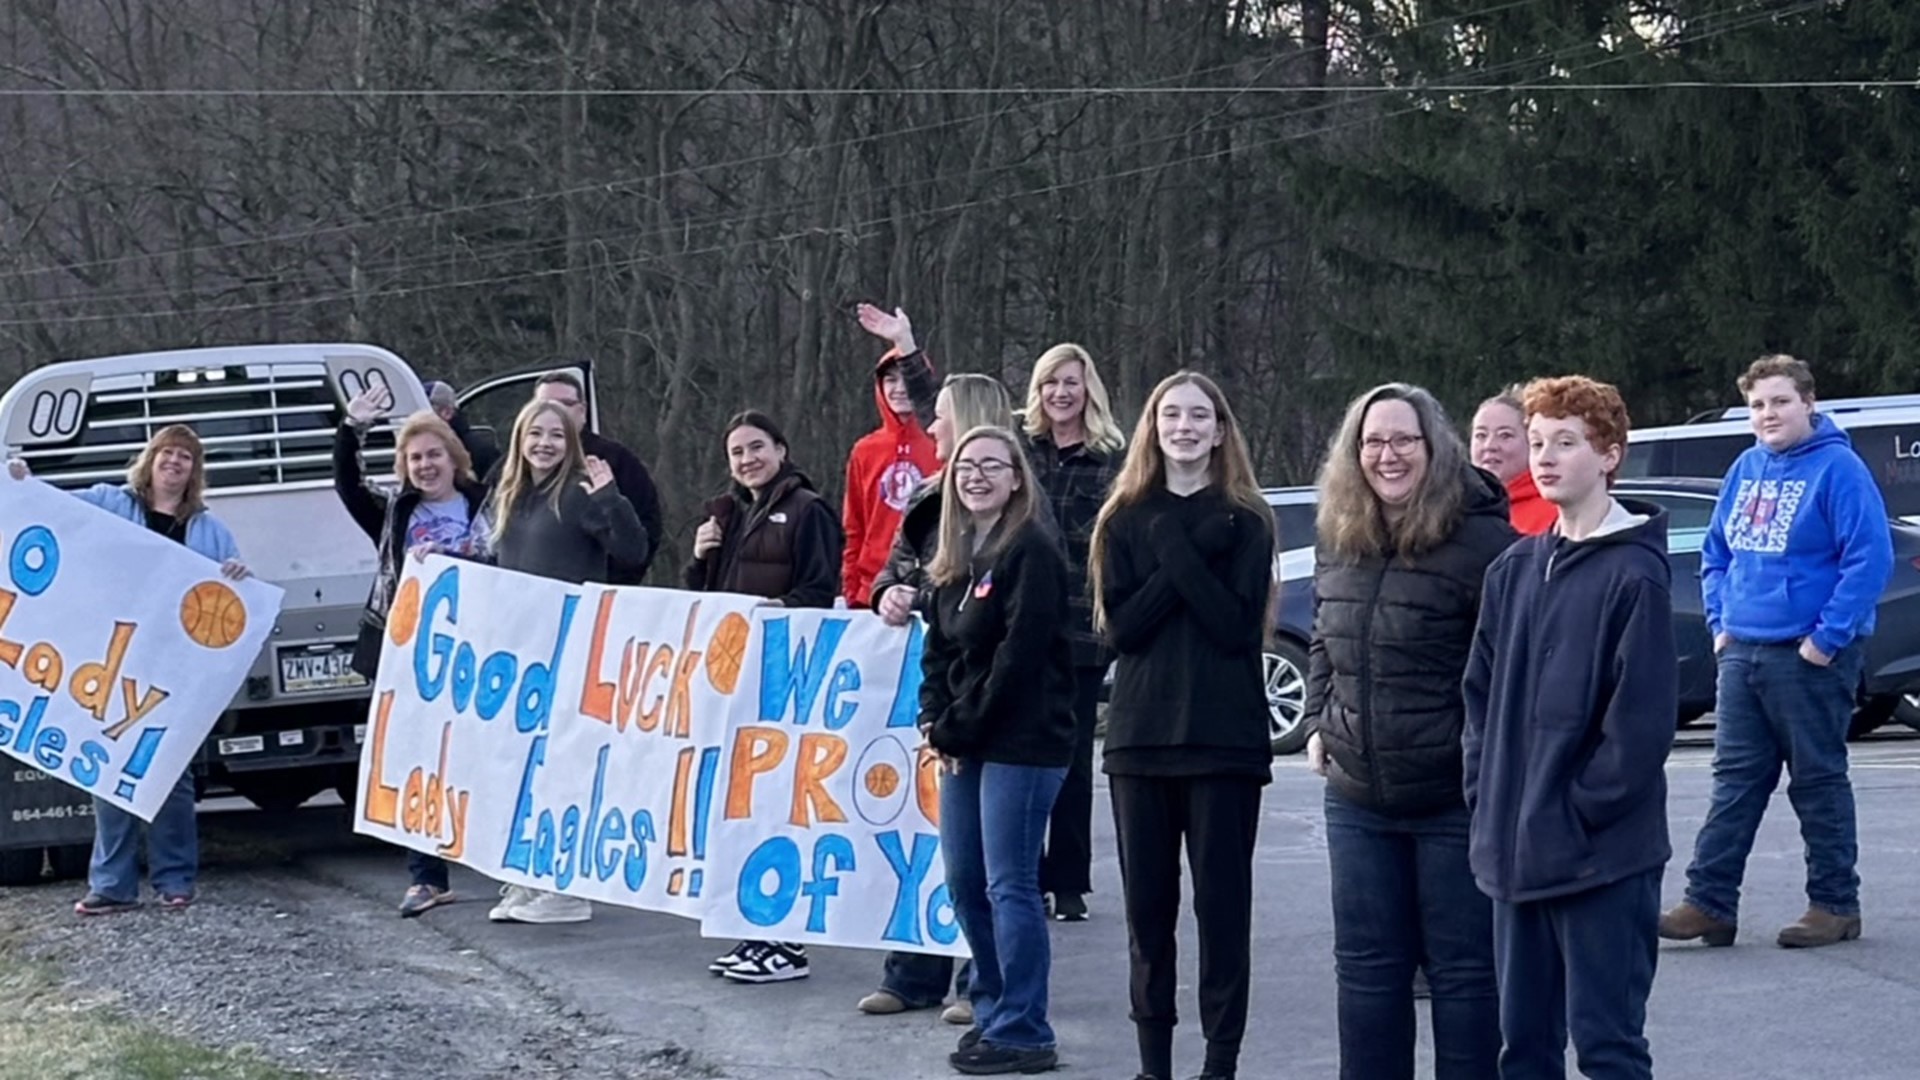 As the team left the school, fans lined the streets with signs to wish the girls luck.